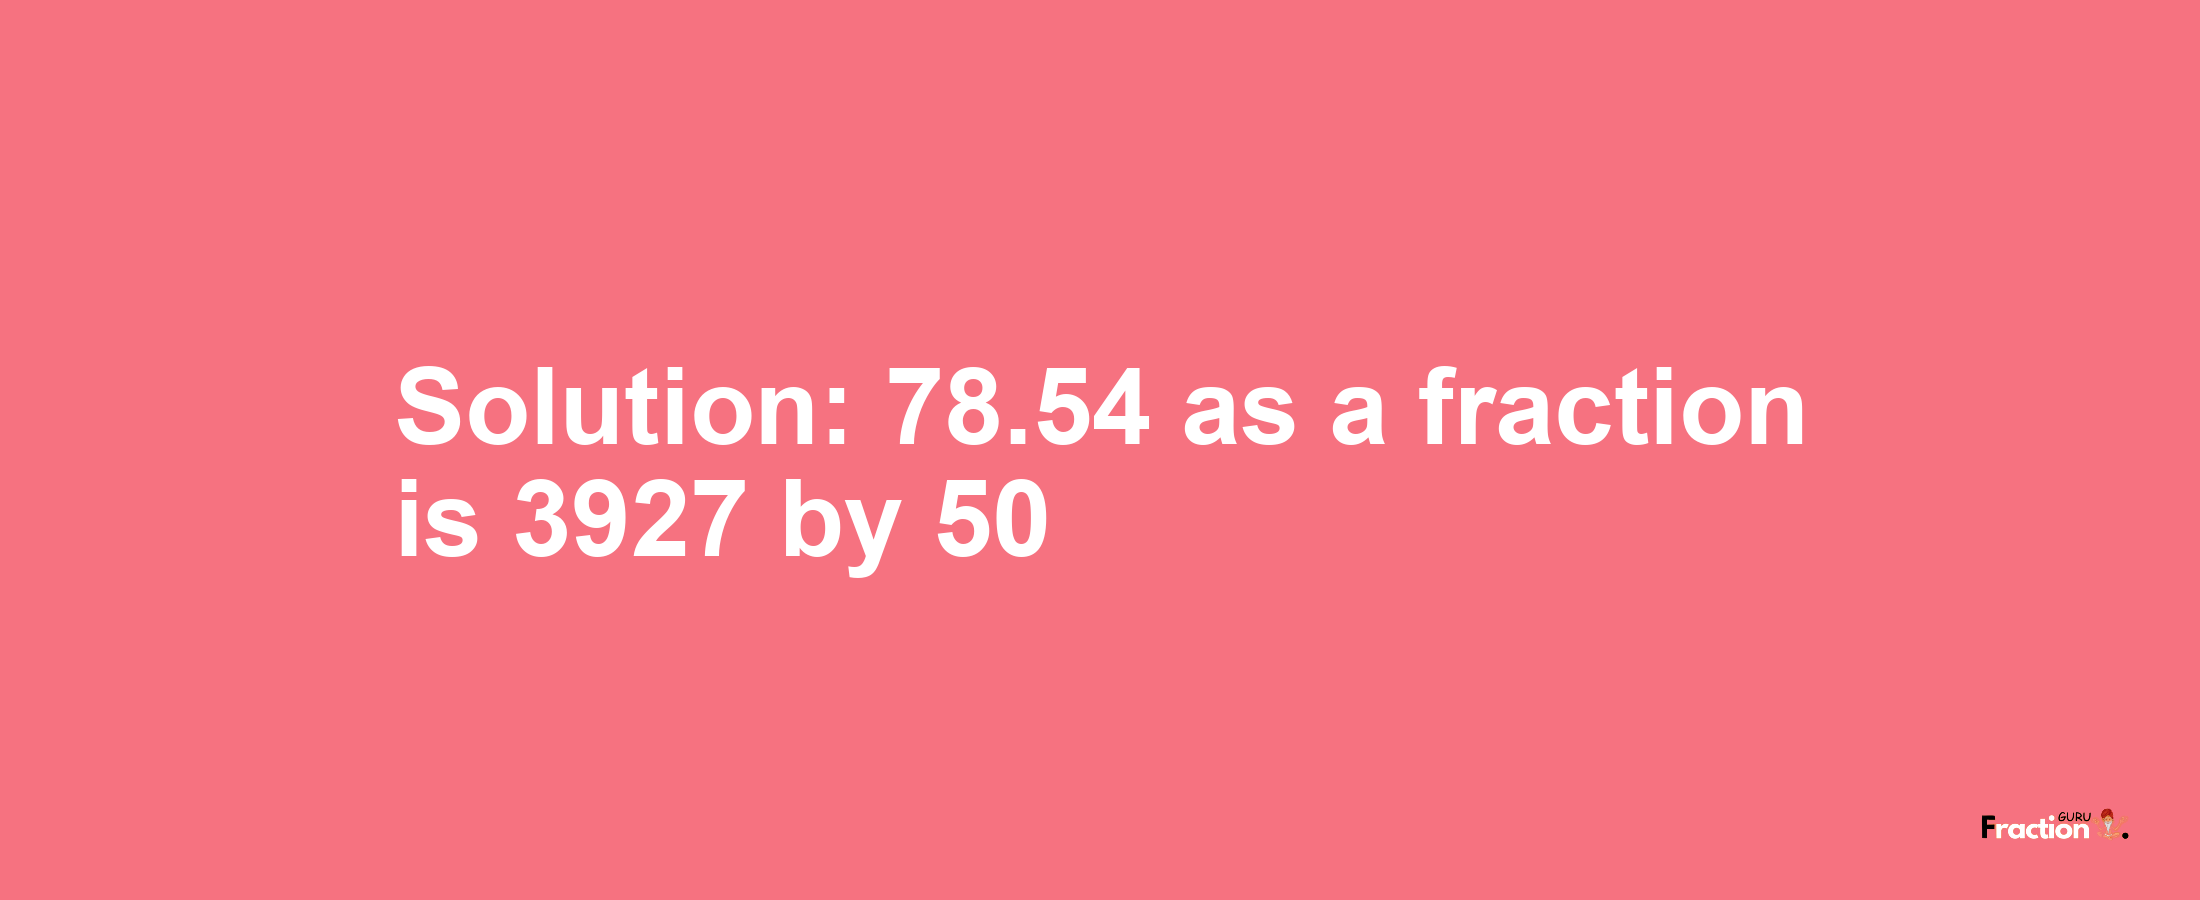 Solution:78.54 as a fraction is 3927/50